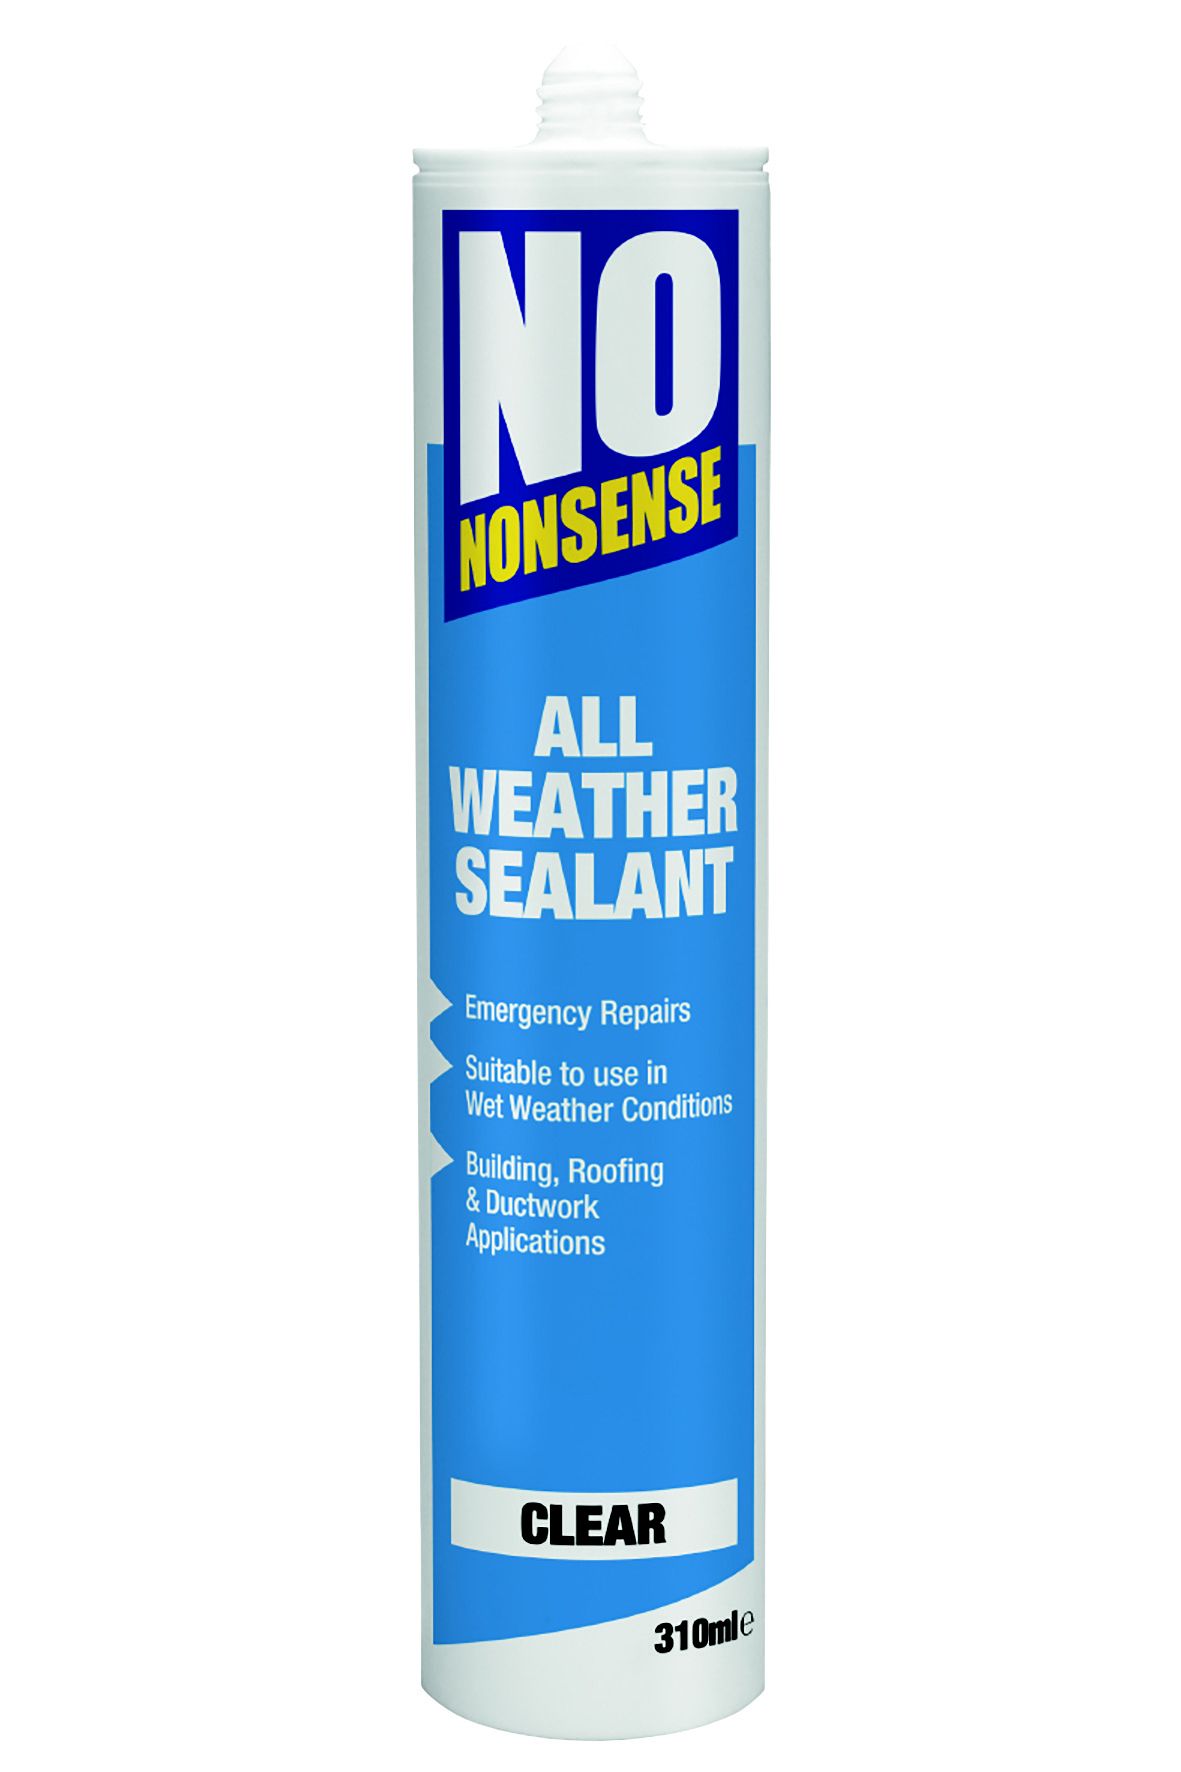 https://kingfisher.scene7.com/is/image/Kingfisher/no-nonsense-ready-to-use-all-weather-clear-sealant-310ml~01096347_02c?$MOB_PREV$&$width=768&$height=768